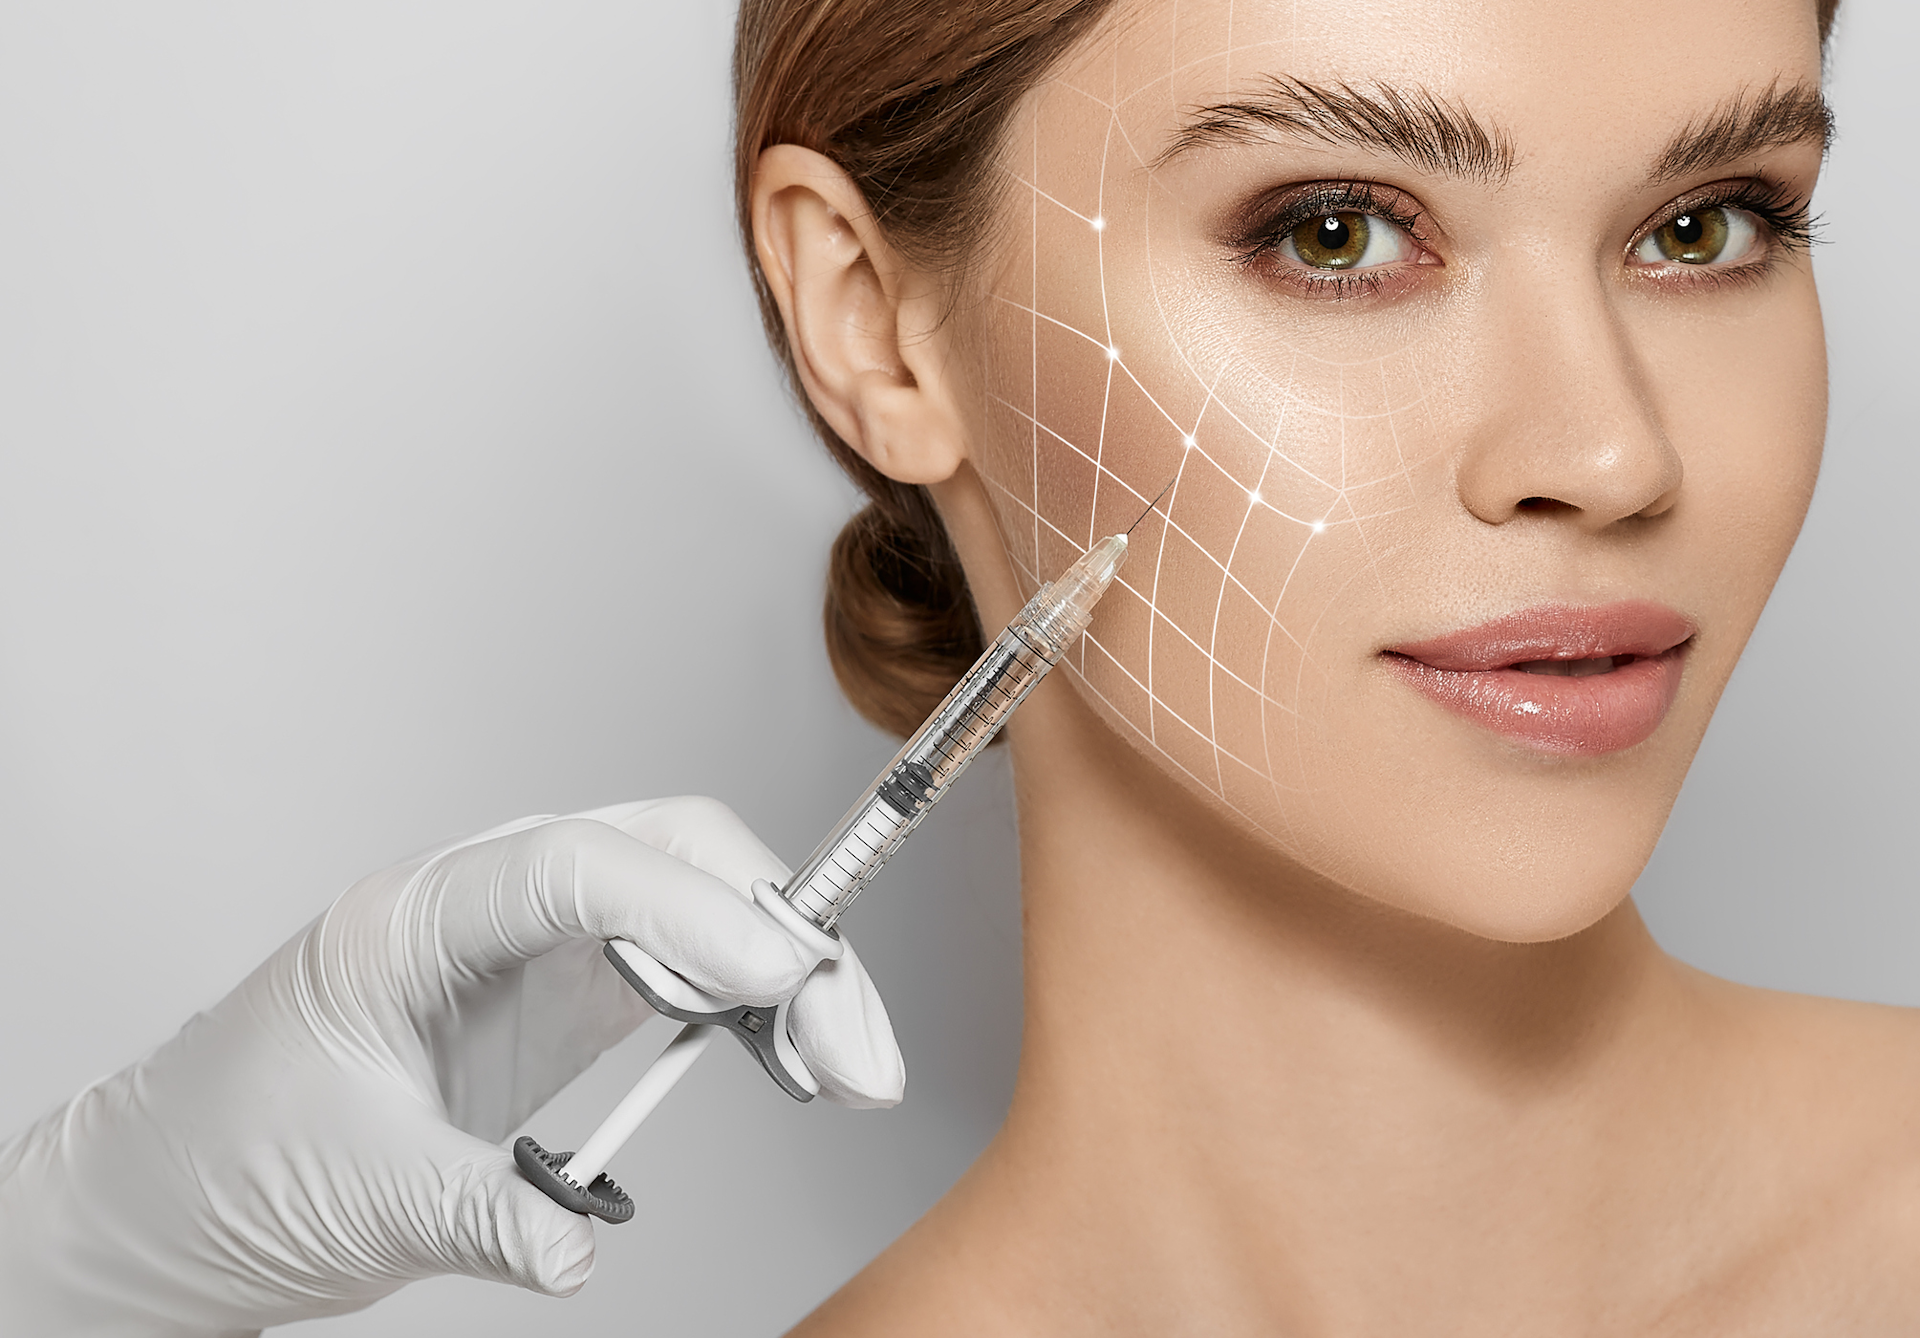 Polynucleotides Treatments For Face And Under Eyes